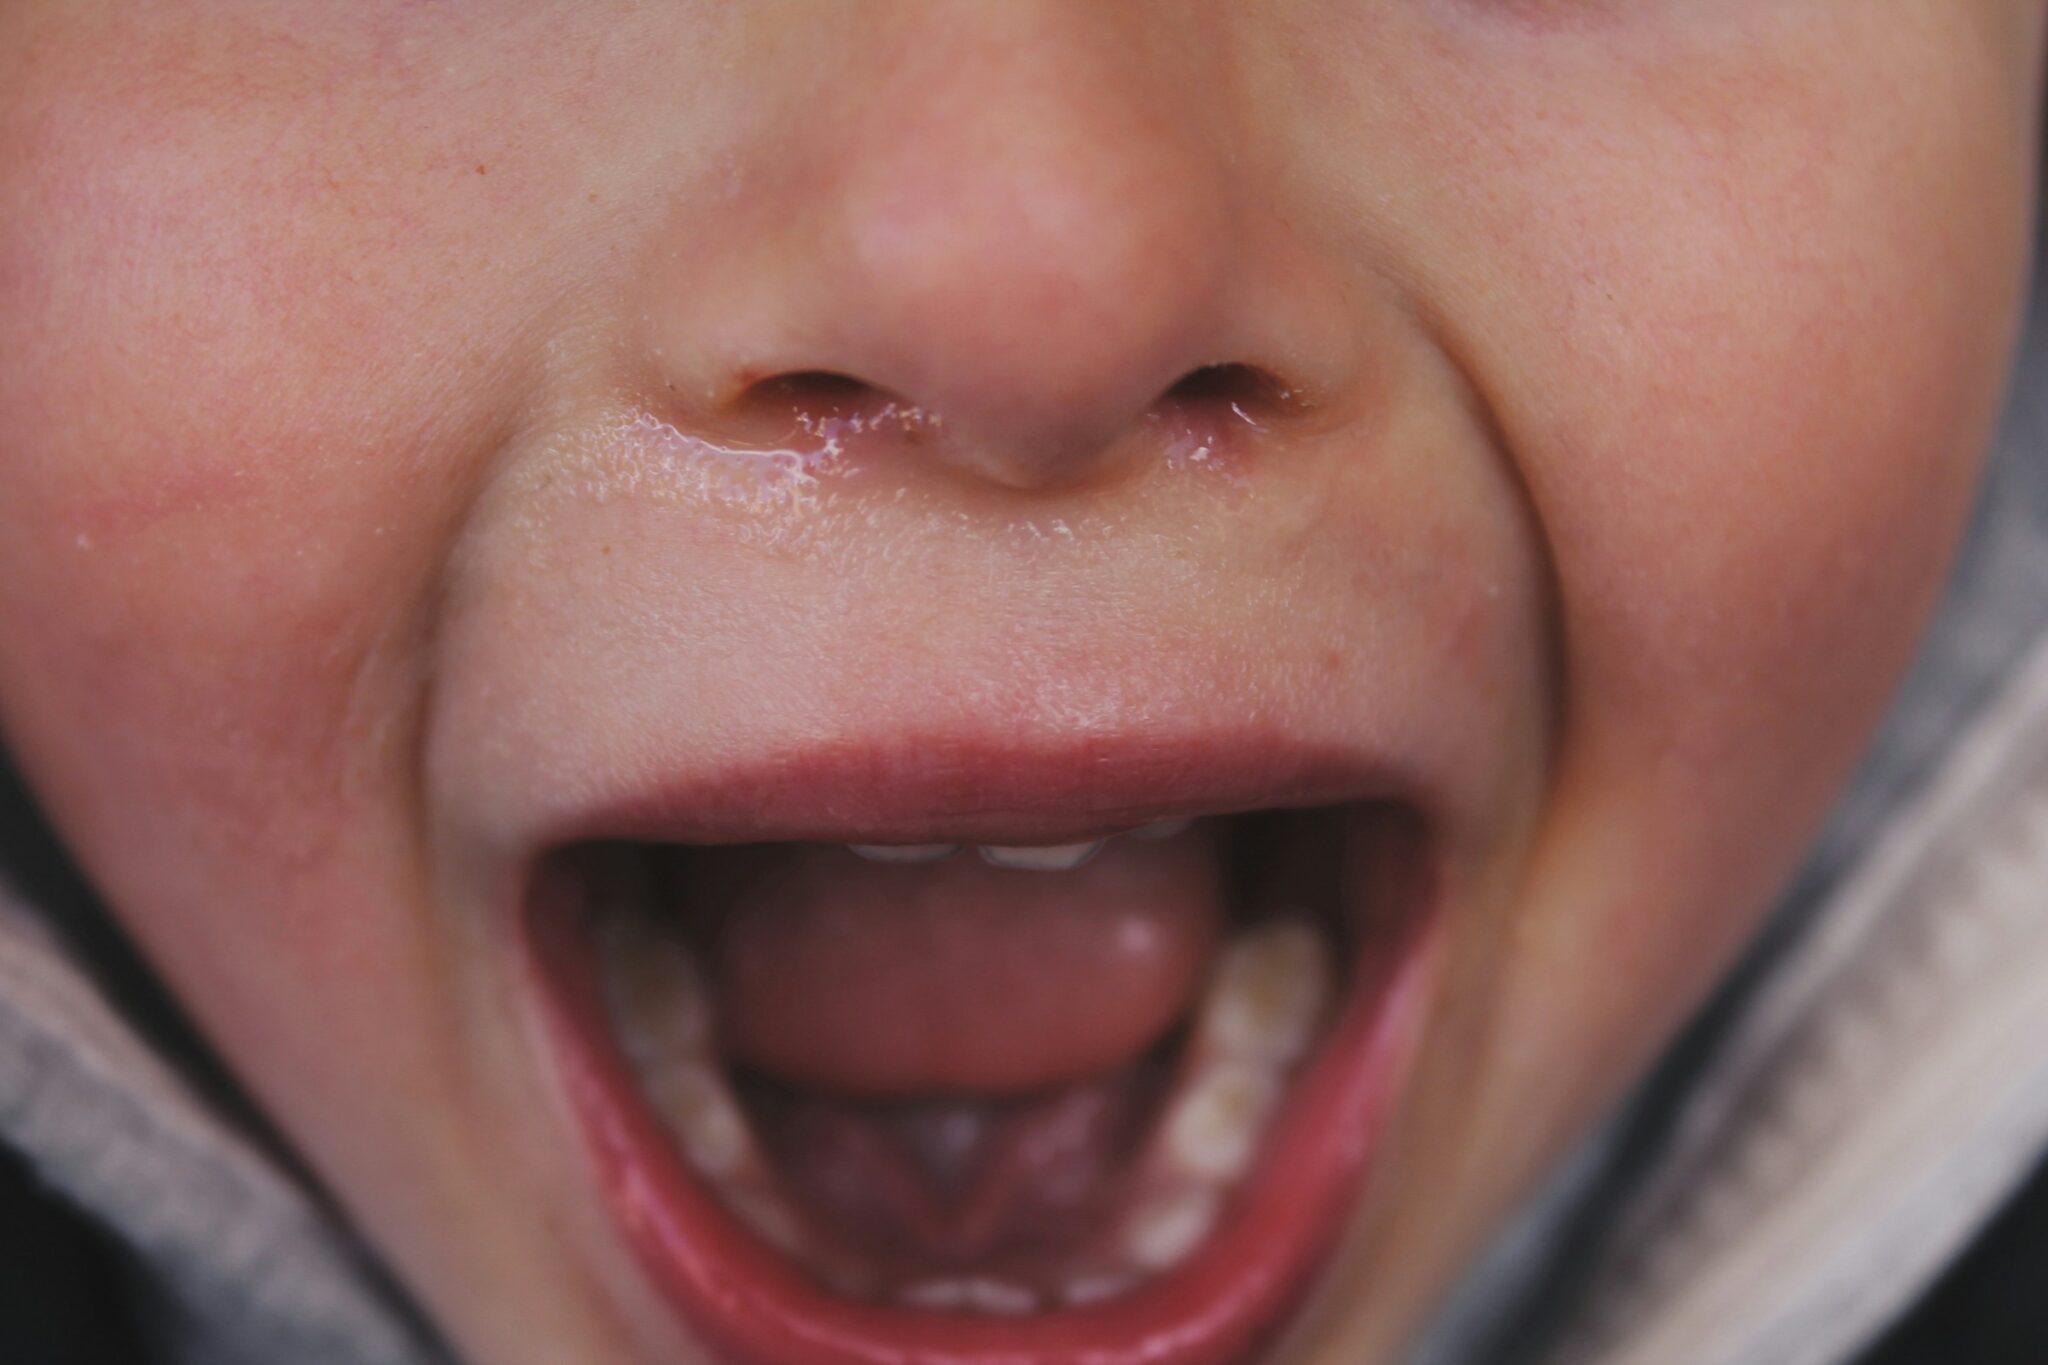 Close-up on crying child’s nose and mouth